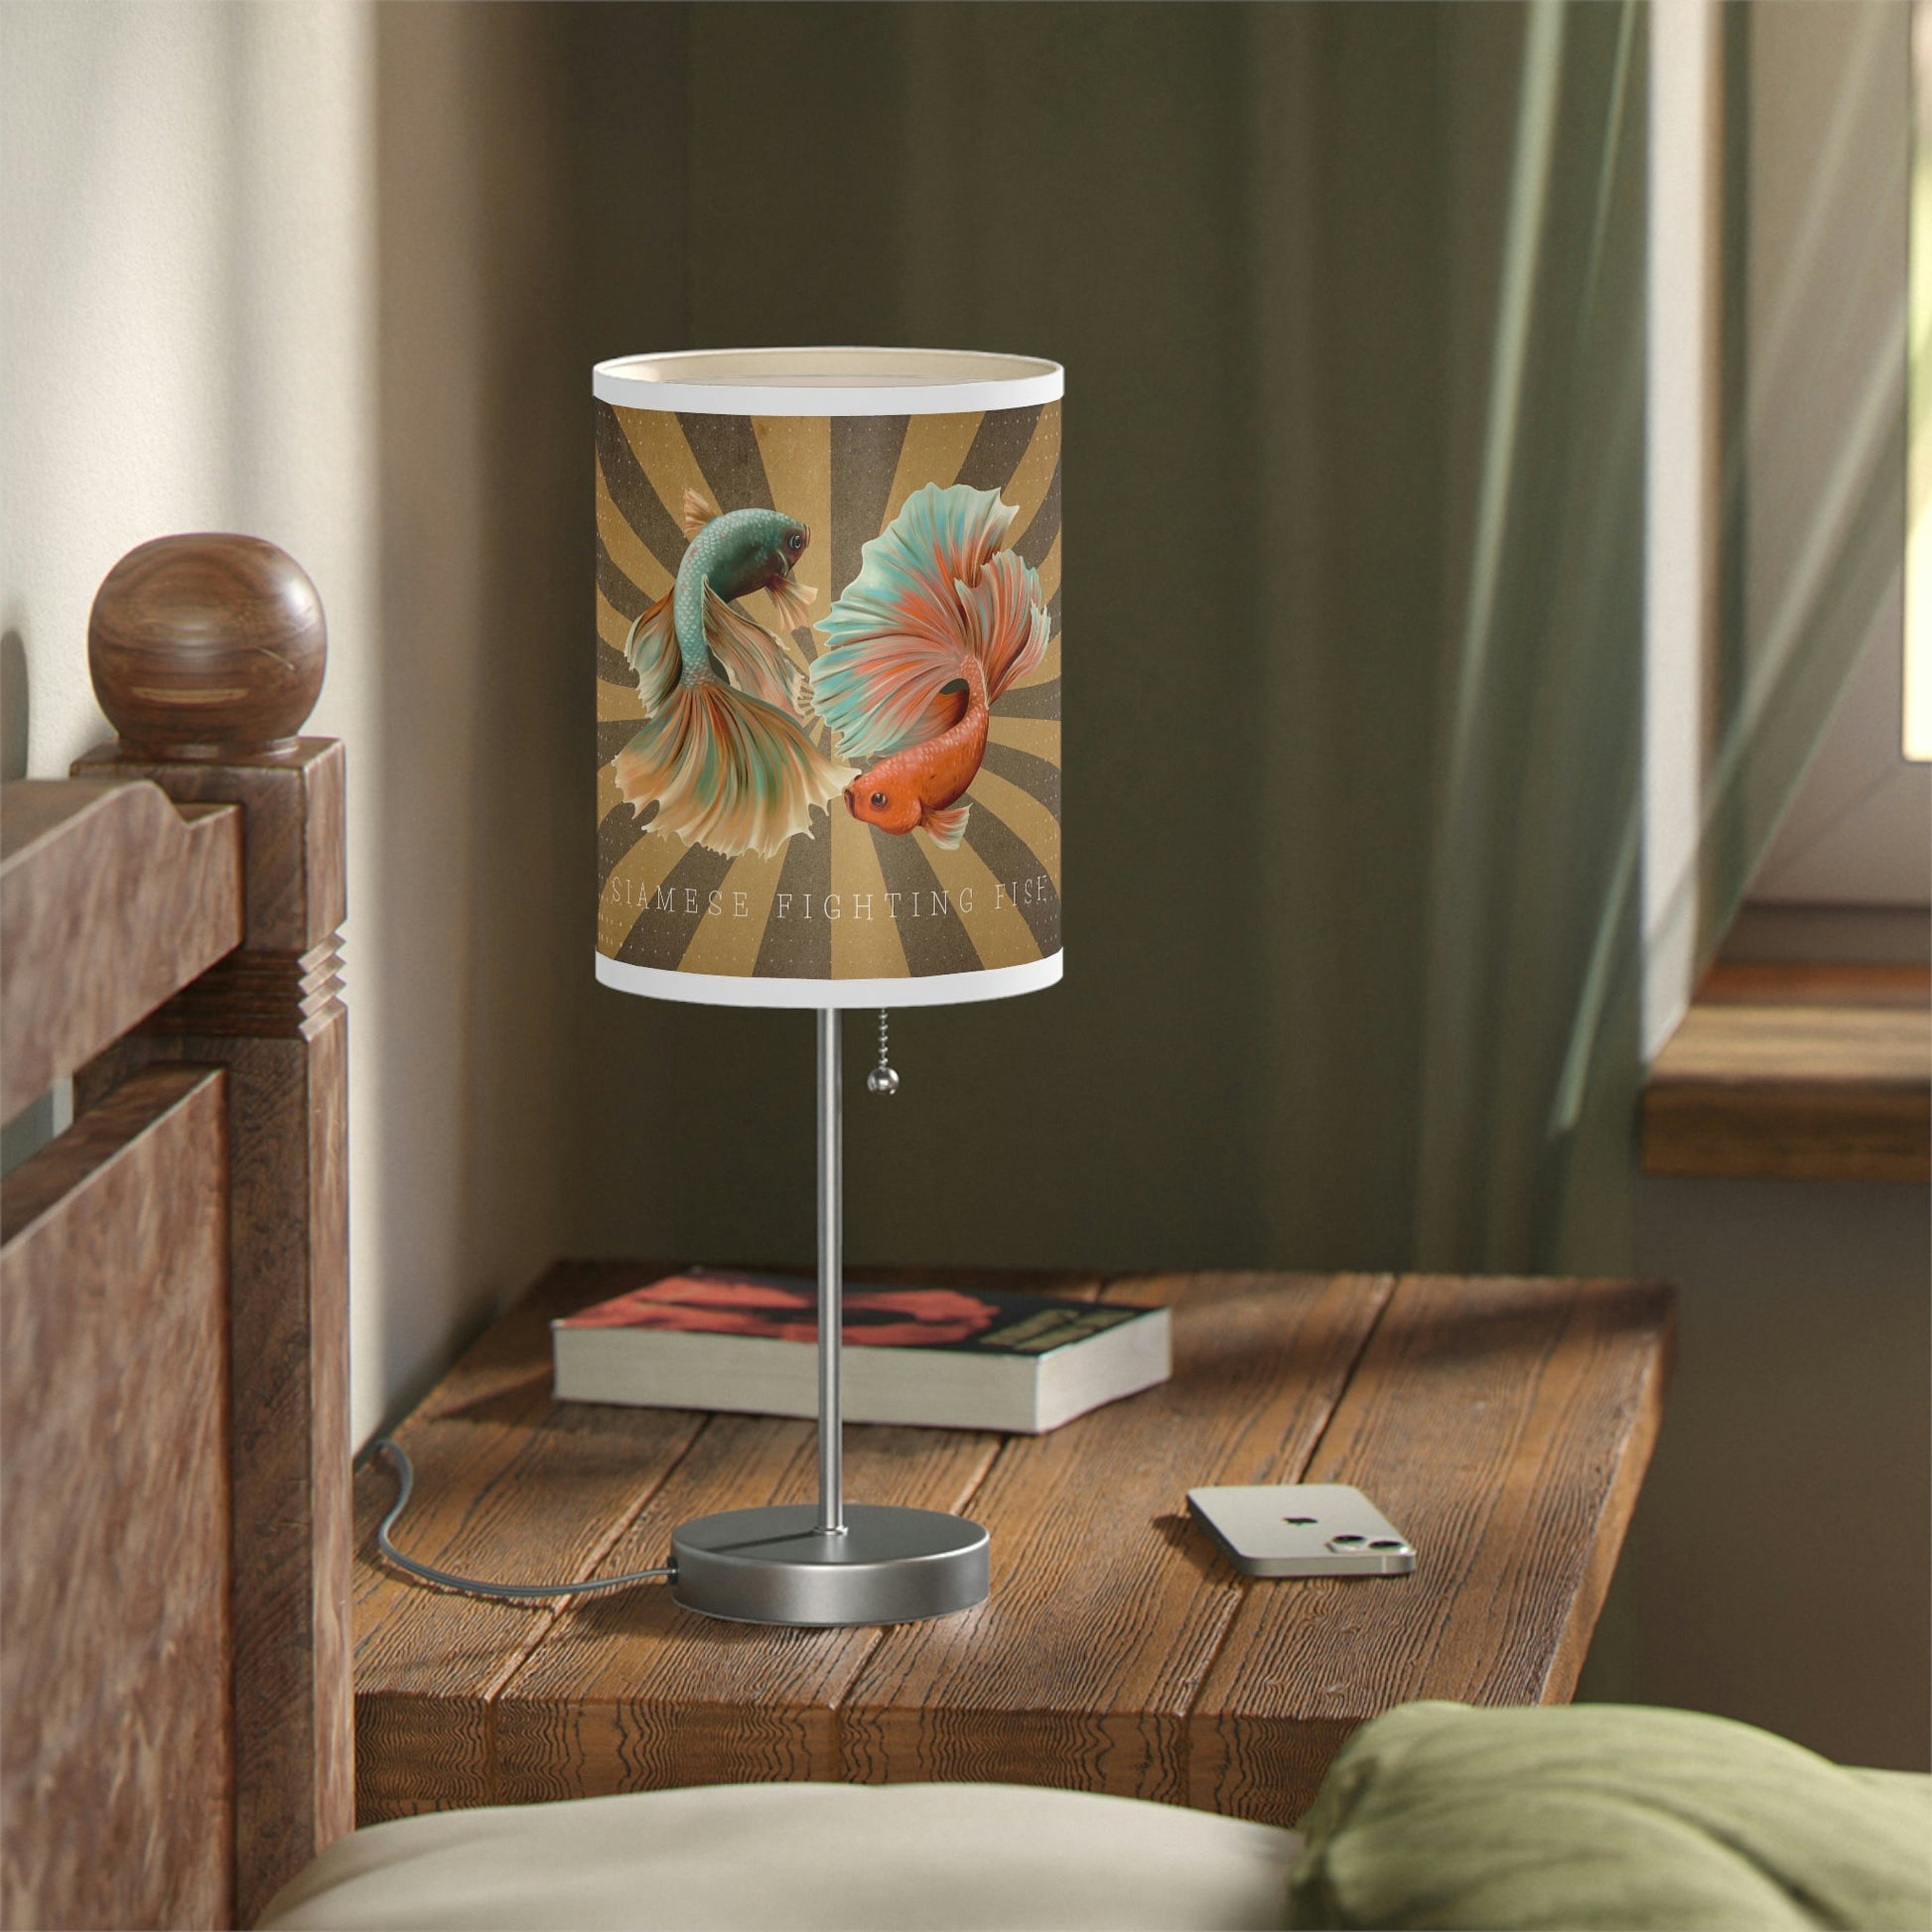 Siamese Fighting Fish Lamp on a Stand, US|CA plug